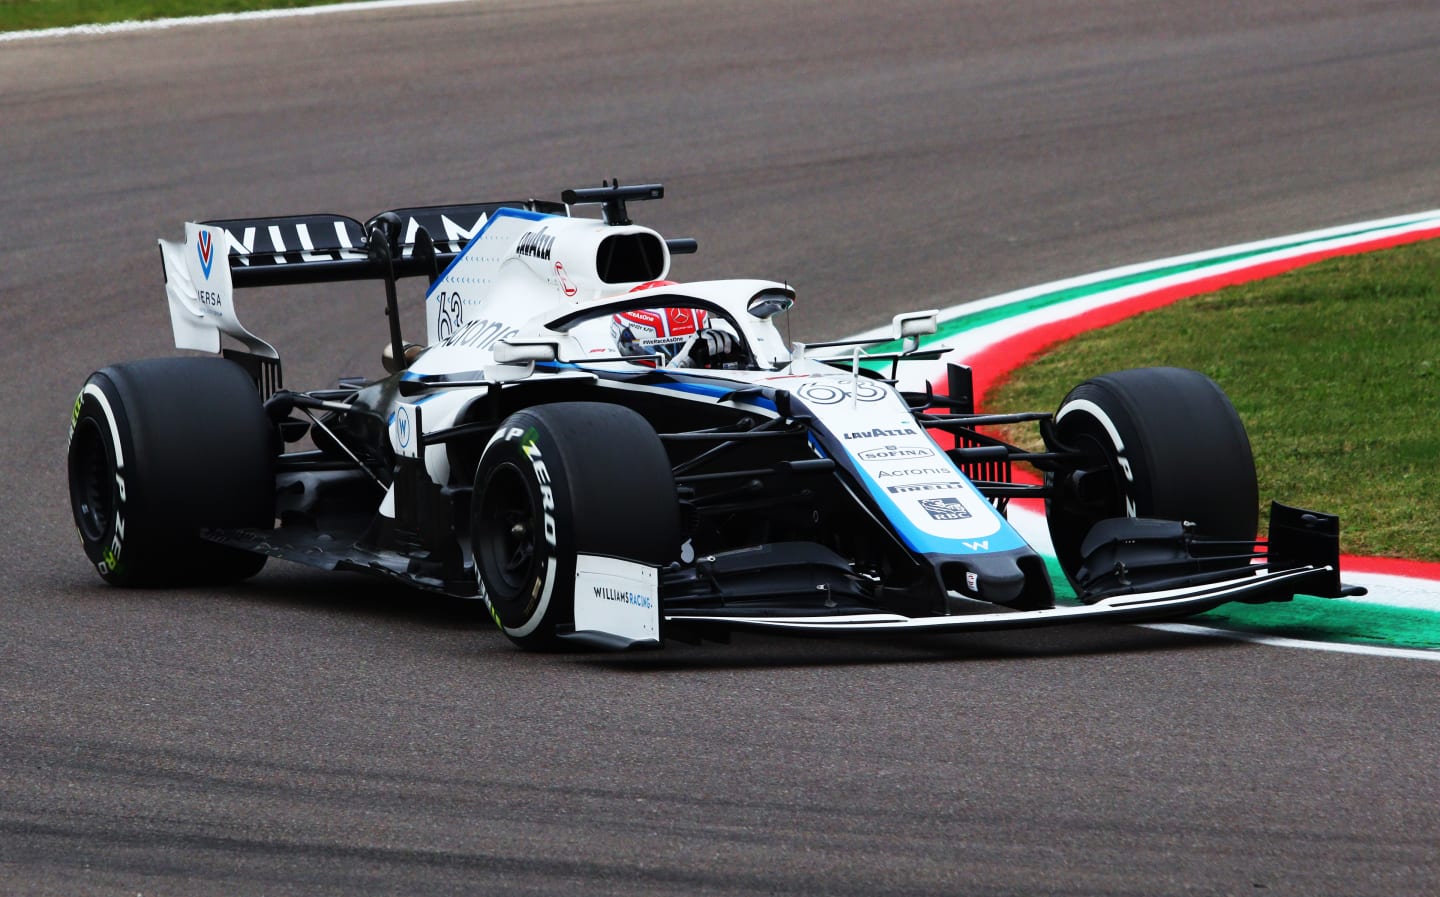 IMOLA, ITALY - NOVEMBER 01: George Russell of Great Britain driving the (63) Williams Racing FW43 Mercedes on track during the F1 Grand Prix of Emilia Romagna at Autodromo Enzo e Dino Ferrari on November 01, 2020 in Imola, Italy. (Photo by Davide Gennari - Pool/Getty Images)